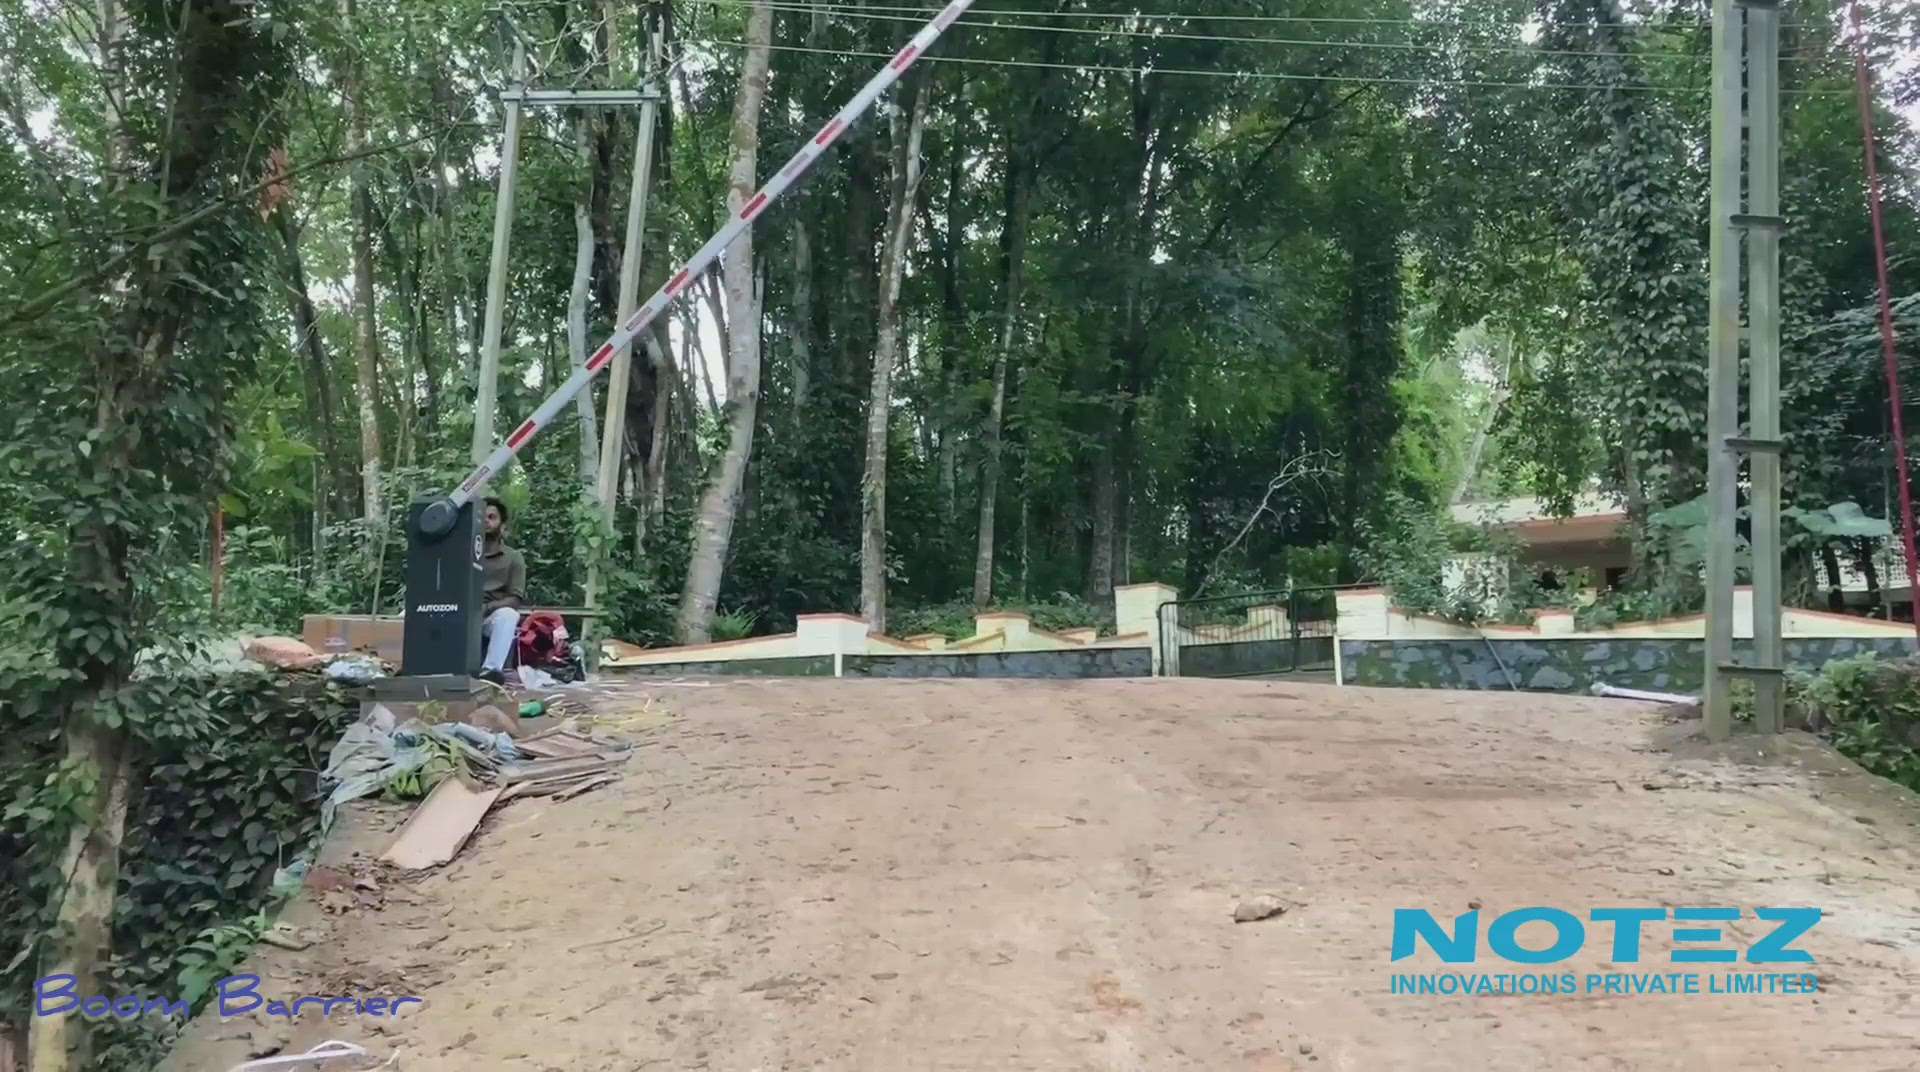 NOTEZ INNOVATIONS PVT. LTD. provides Boom Barrier installation under the   supervision of our experts using optimum grade tools and high-end boom barrier installation techniques.  
For more info 
contact us 

+91 98959 44366
+91 90617 64435
+91 90748 19343